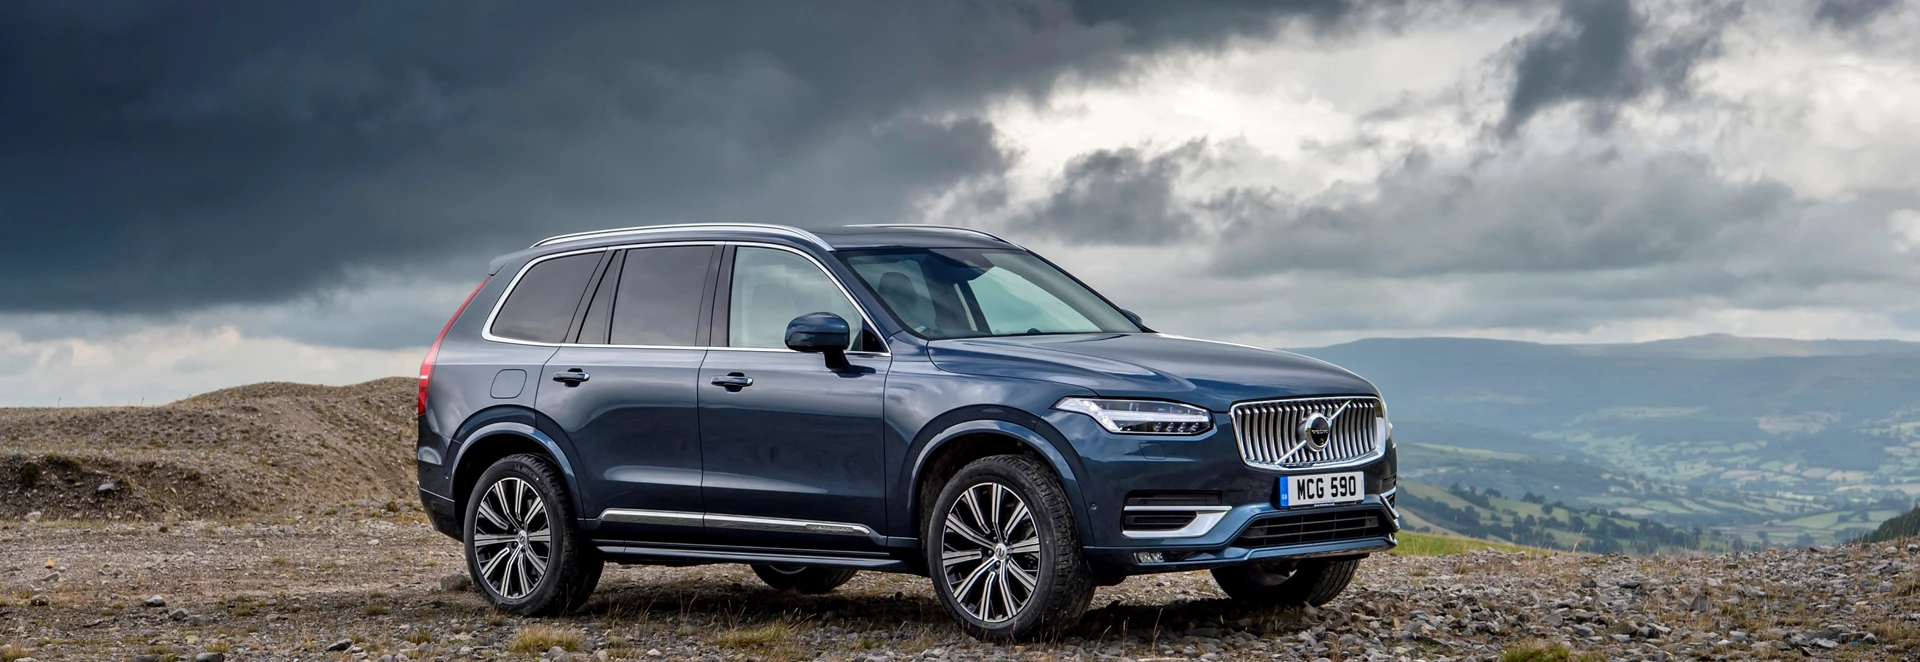 Here’s why Volvo makes some of the safest cars in the world